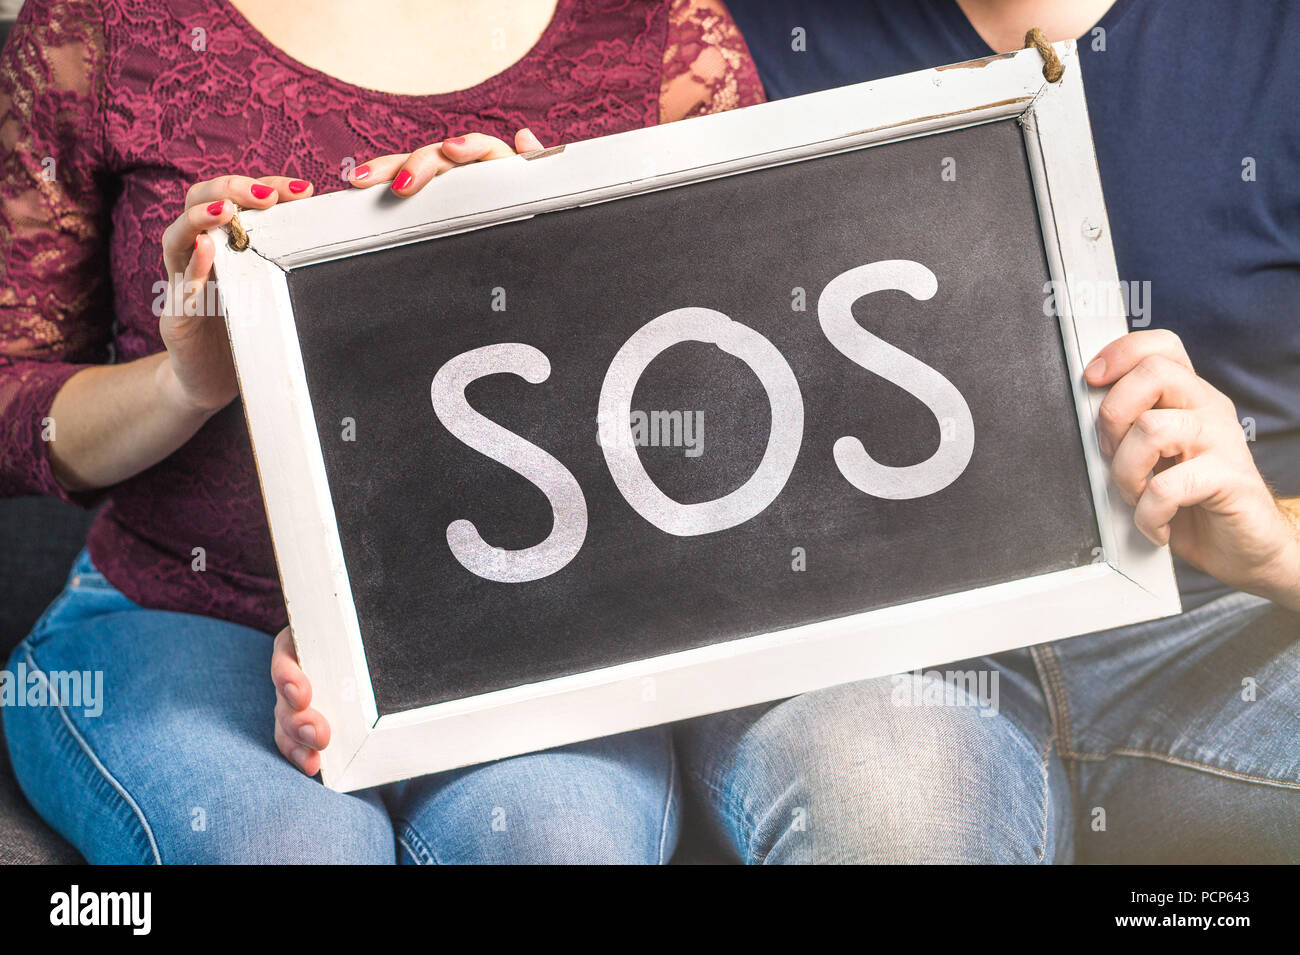 Couples therapy or marriage counseling concept. Needs help for relationship problems. Man and woman holding blackboard with SOS text. Stock Photo